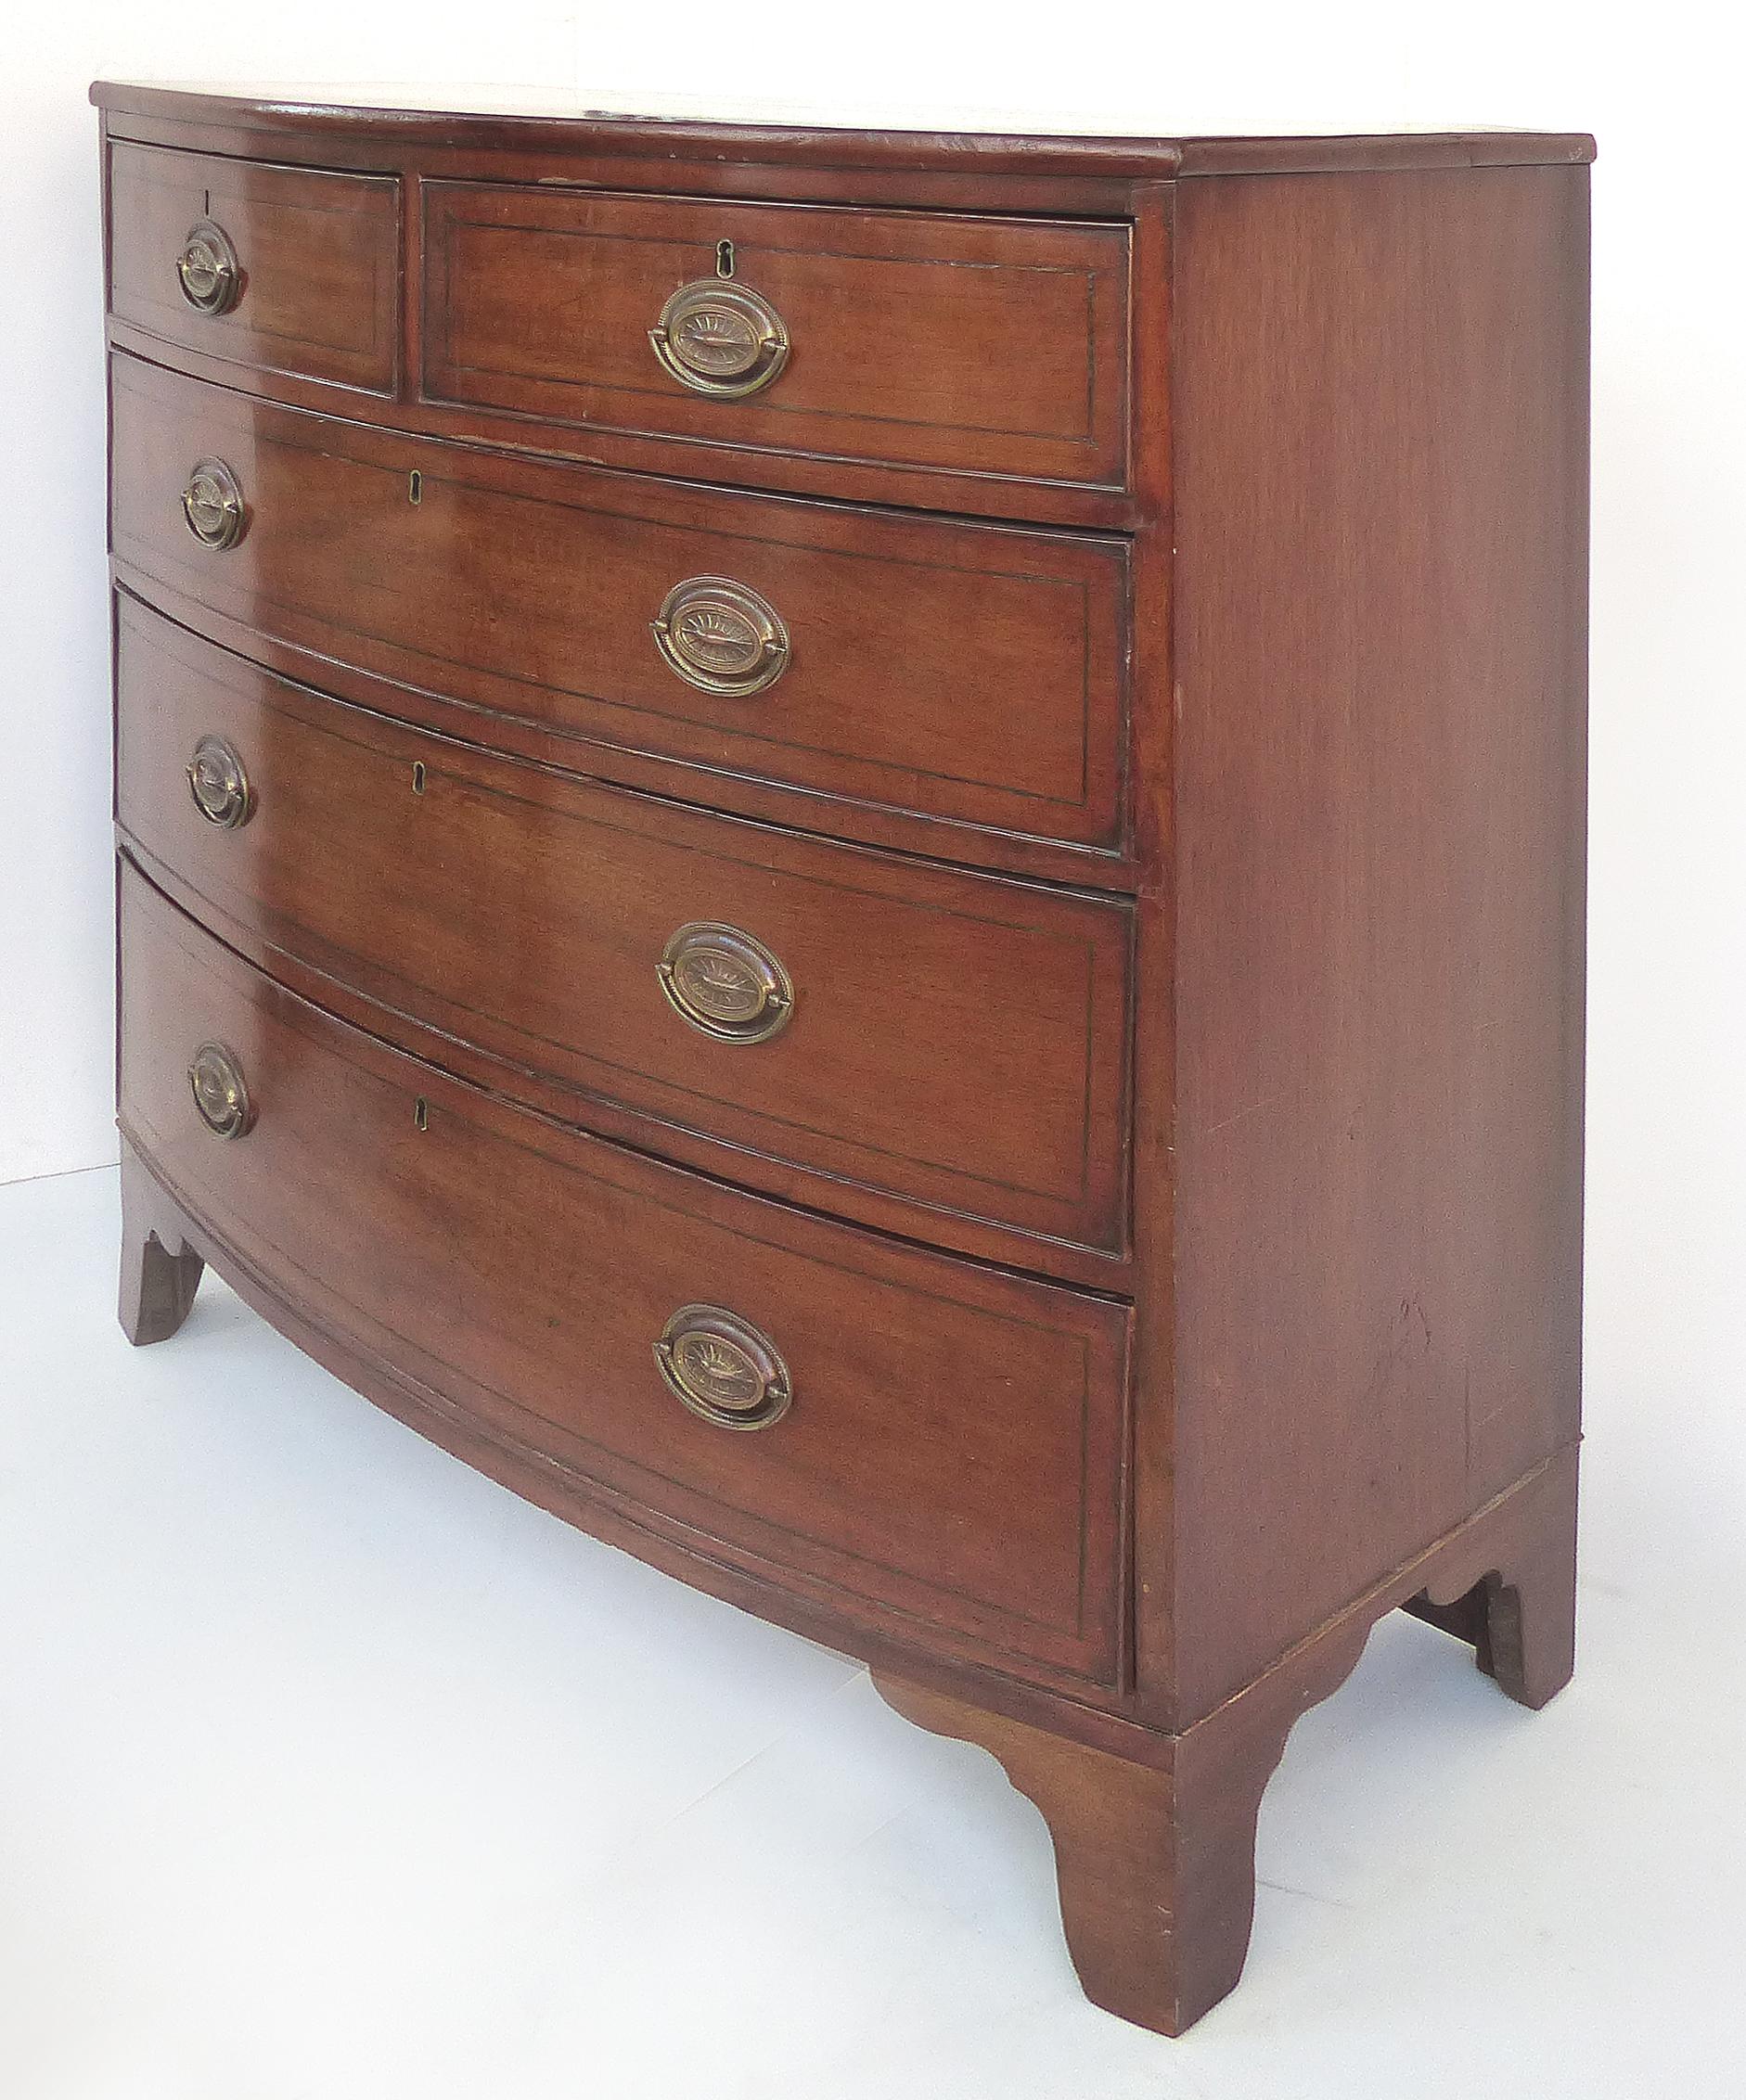 Antique Hepplewhite bow-front chest of drawers in mahogany 

Offered for sale is a late 19th-early into 20th-century Hepplewhite mahogany five drawer bow-front chest of drawers. The cabinet is supported by bracket feet. The dresser retains the